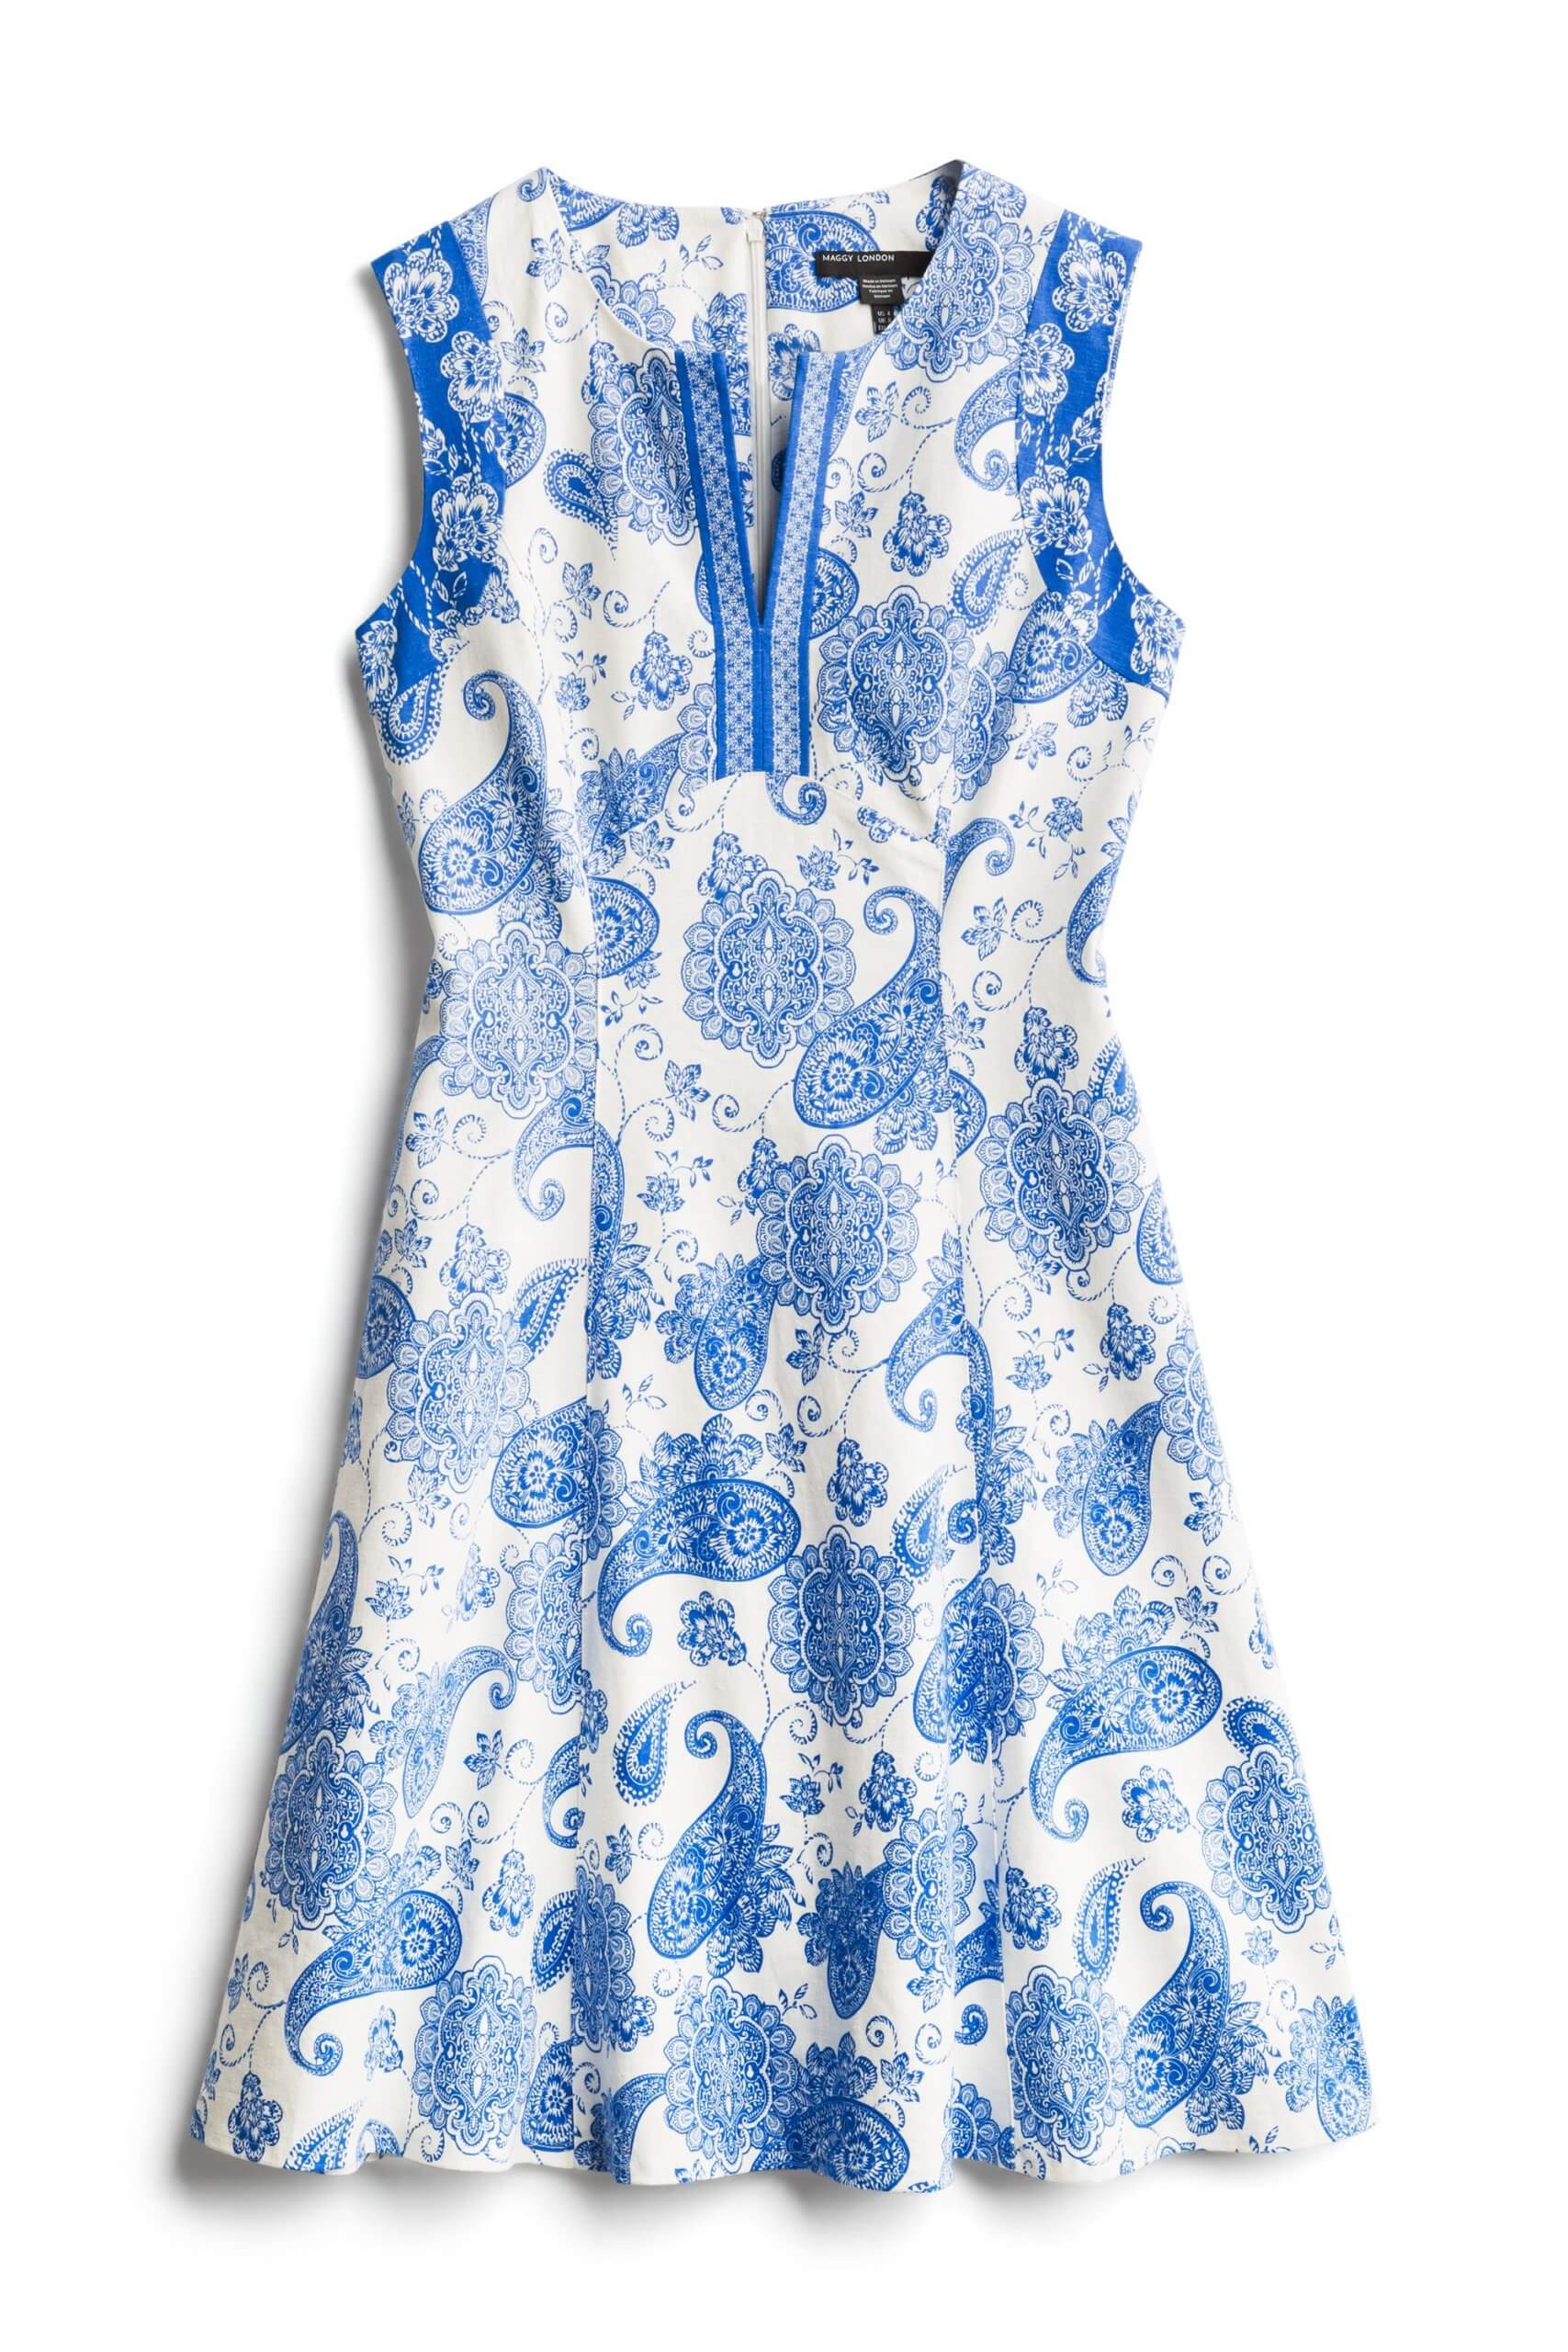 Stitch Fix Women's blue and white paisley print fit and flare dress.